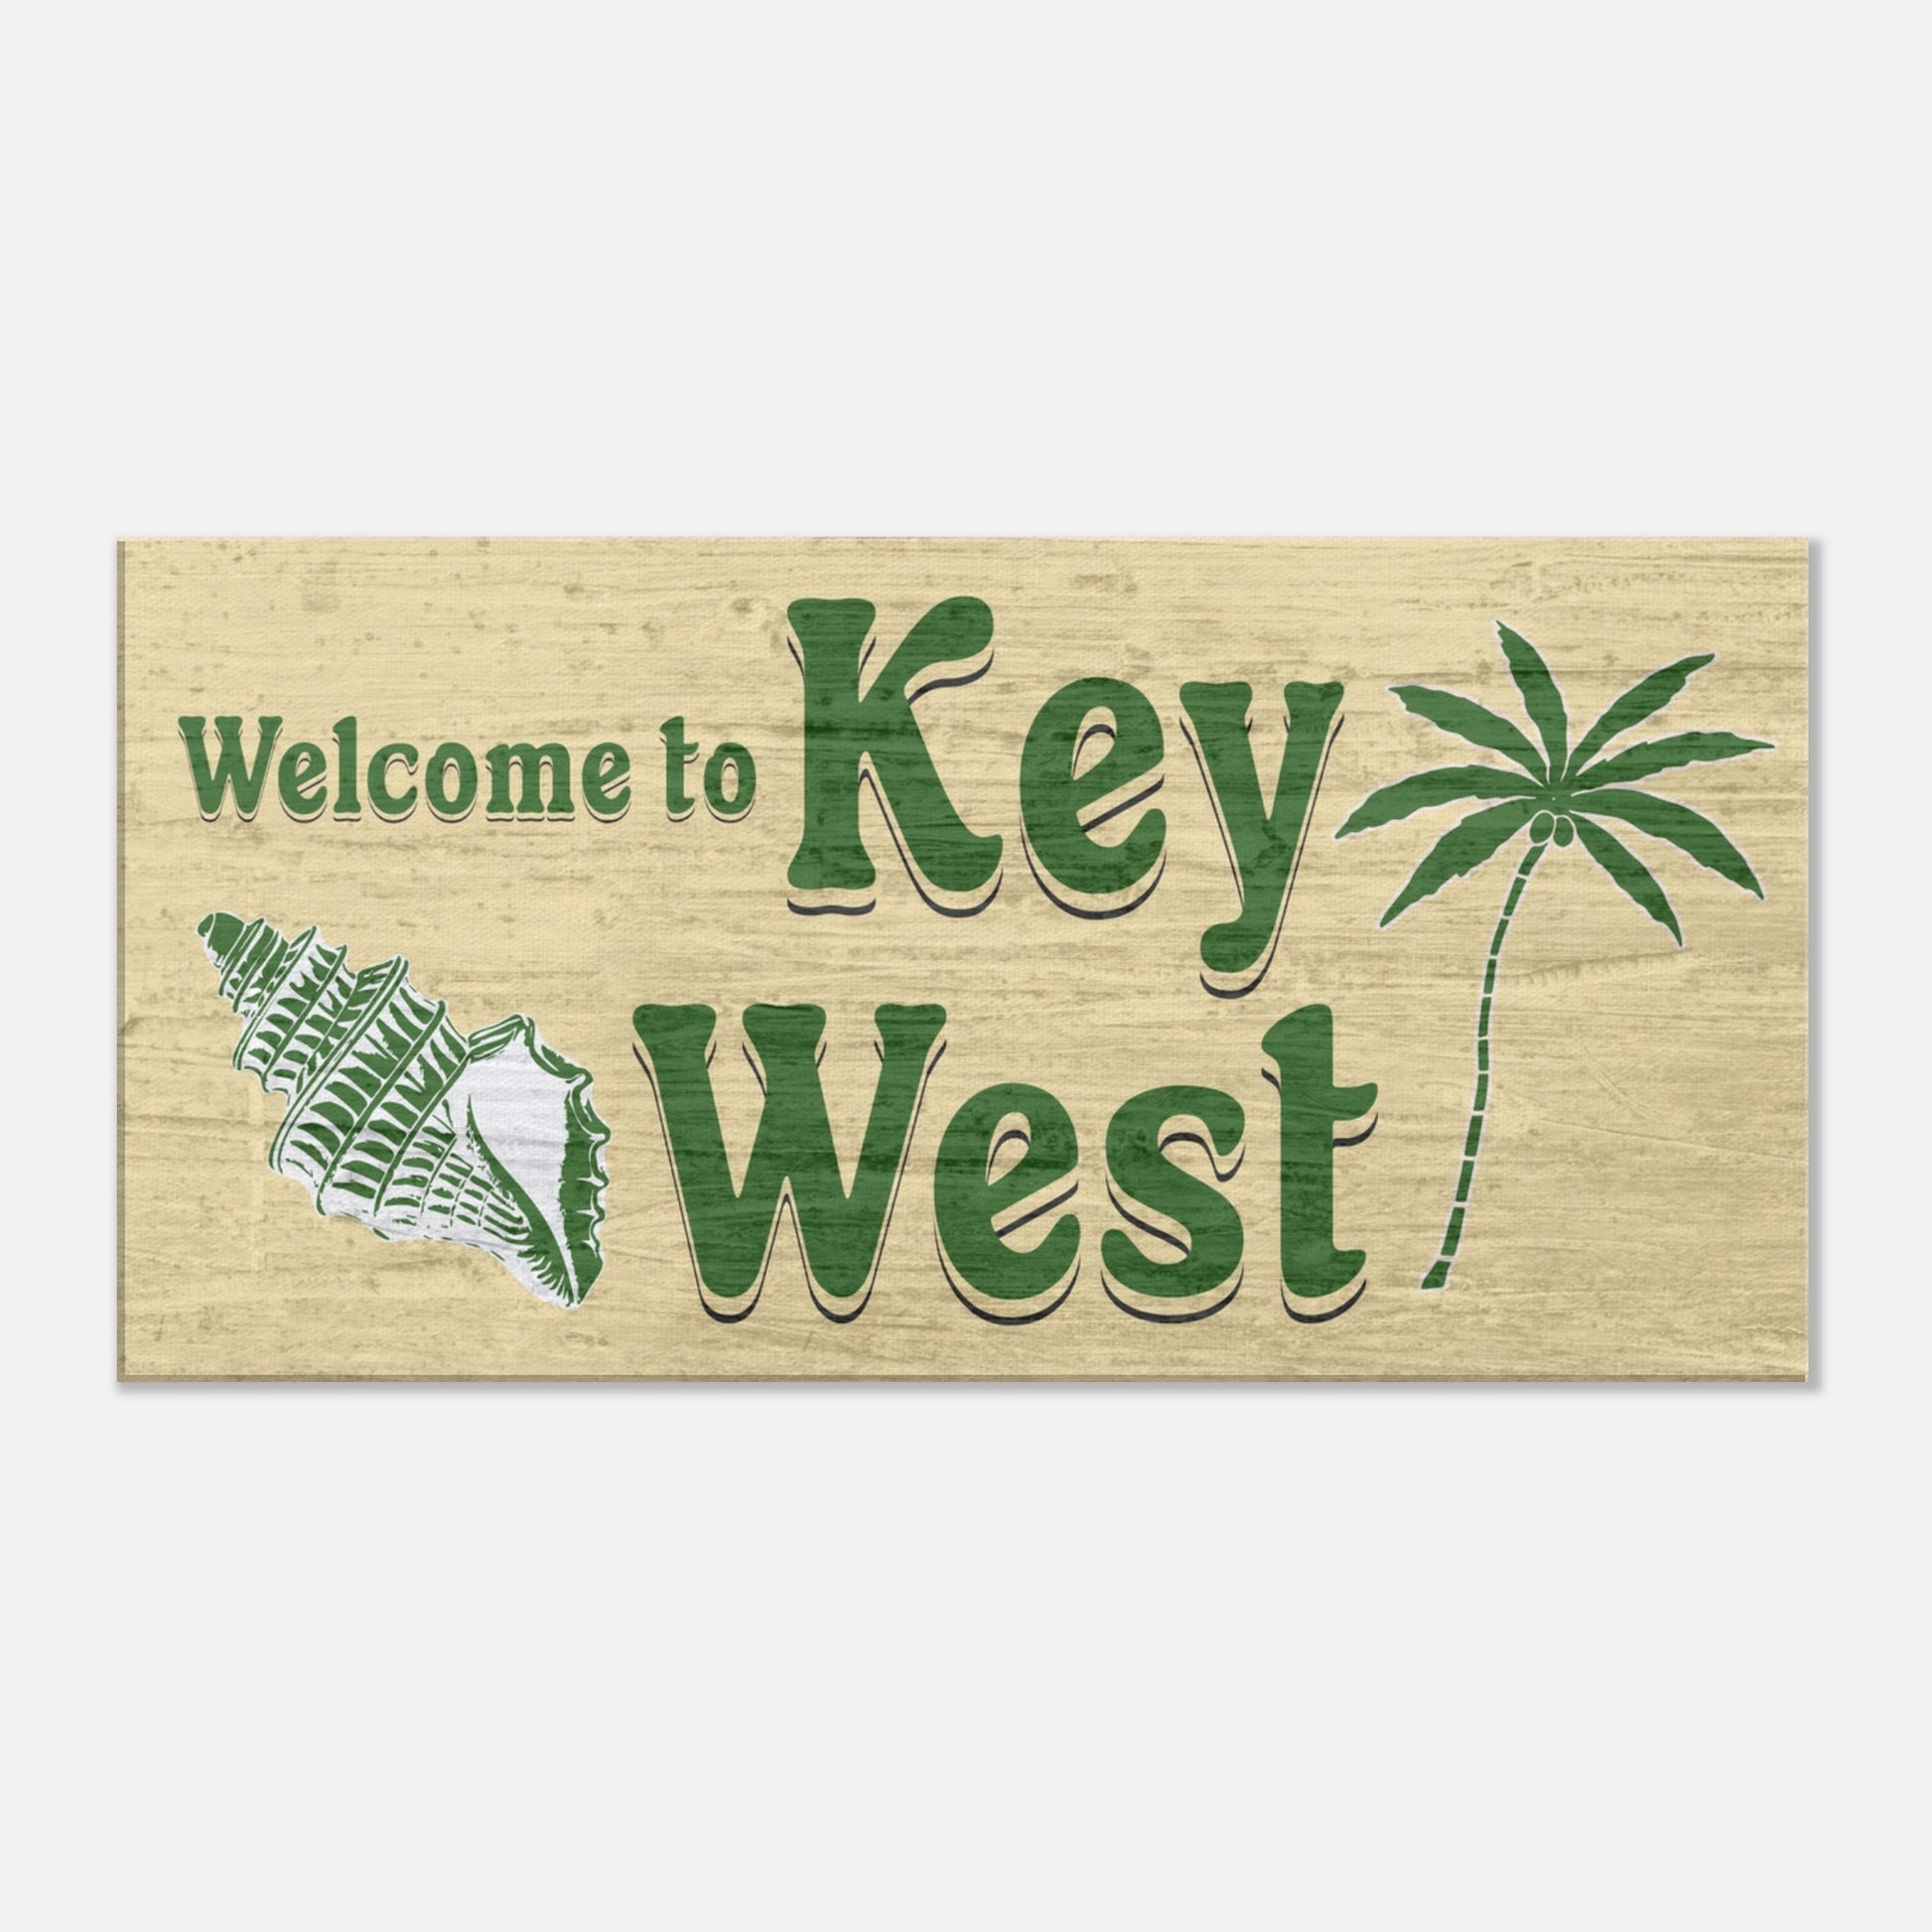 Welcome to Key West Large Canvas Wall Print by Caribbean Rays